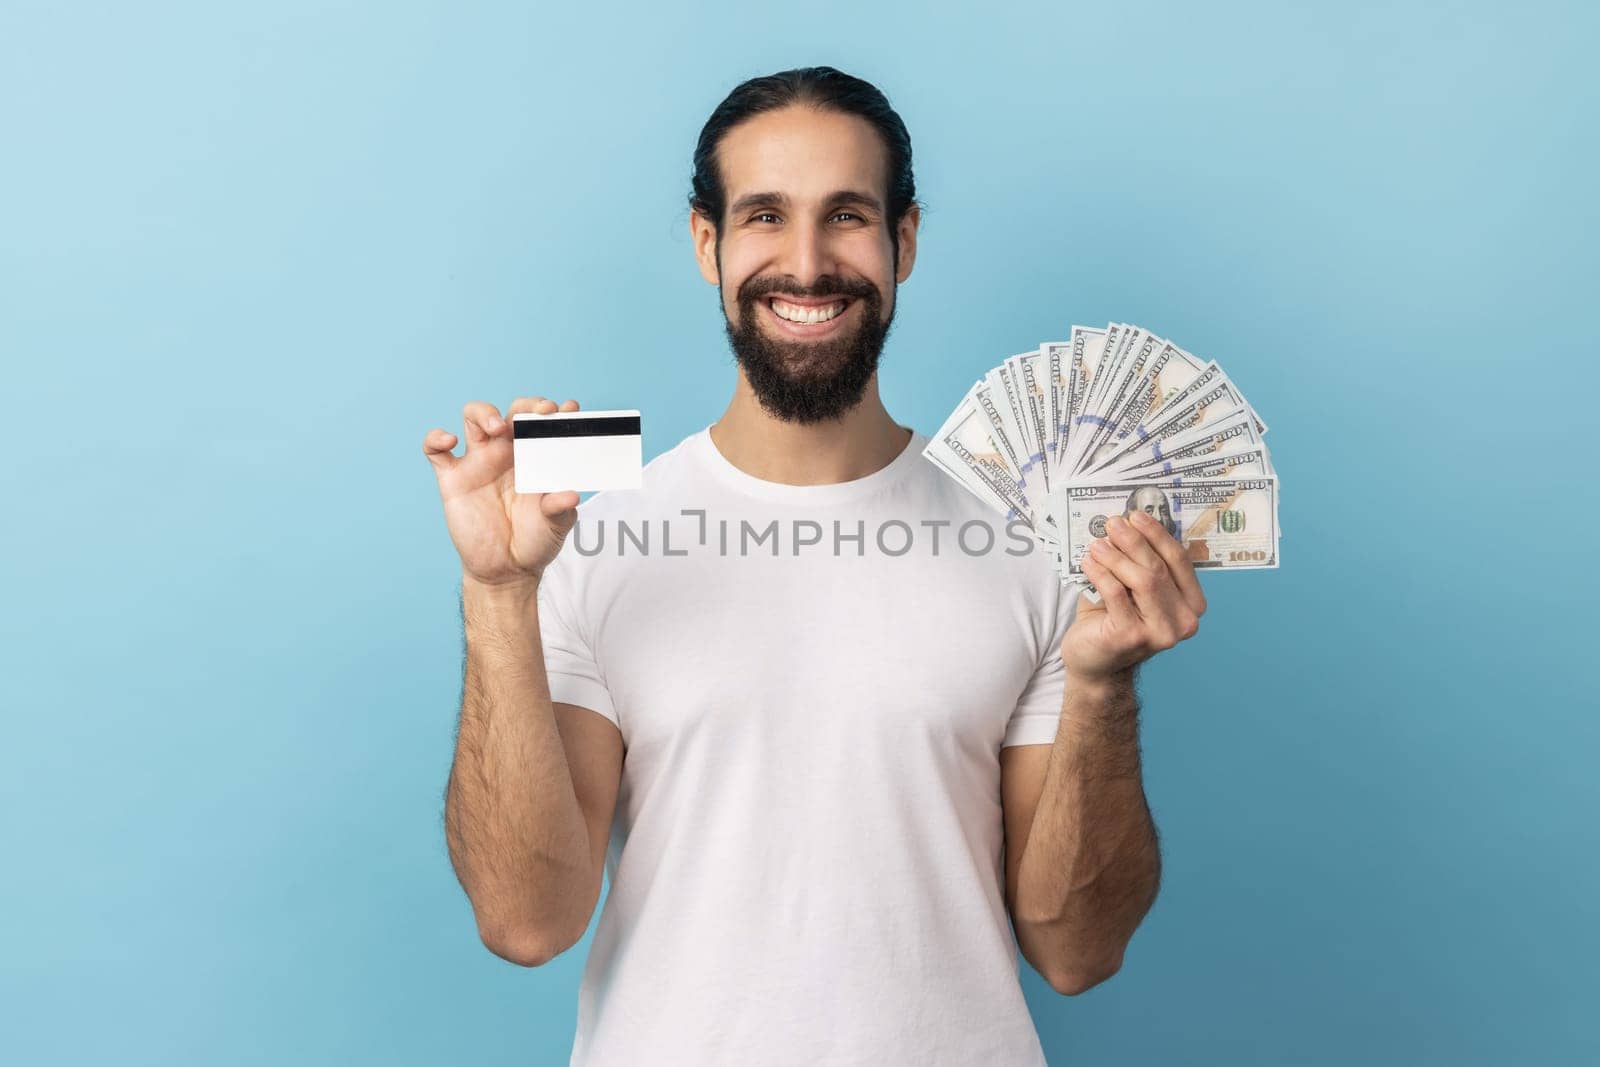 Man with beard wearing white T-shirt holding credit card and dollar banknotes, feeling rich with lot of money, happy to get bank loan for shopping. Indoor studio shot isolated on blue background.